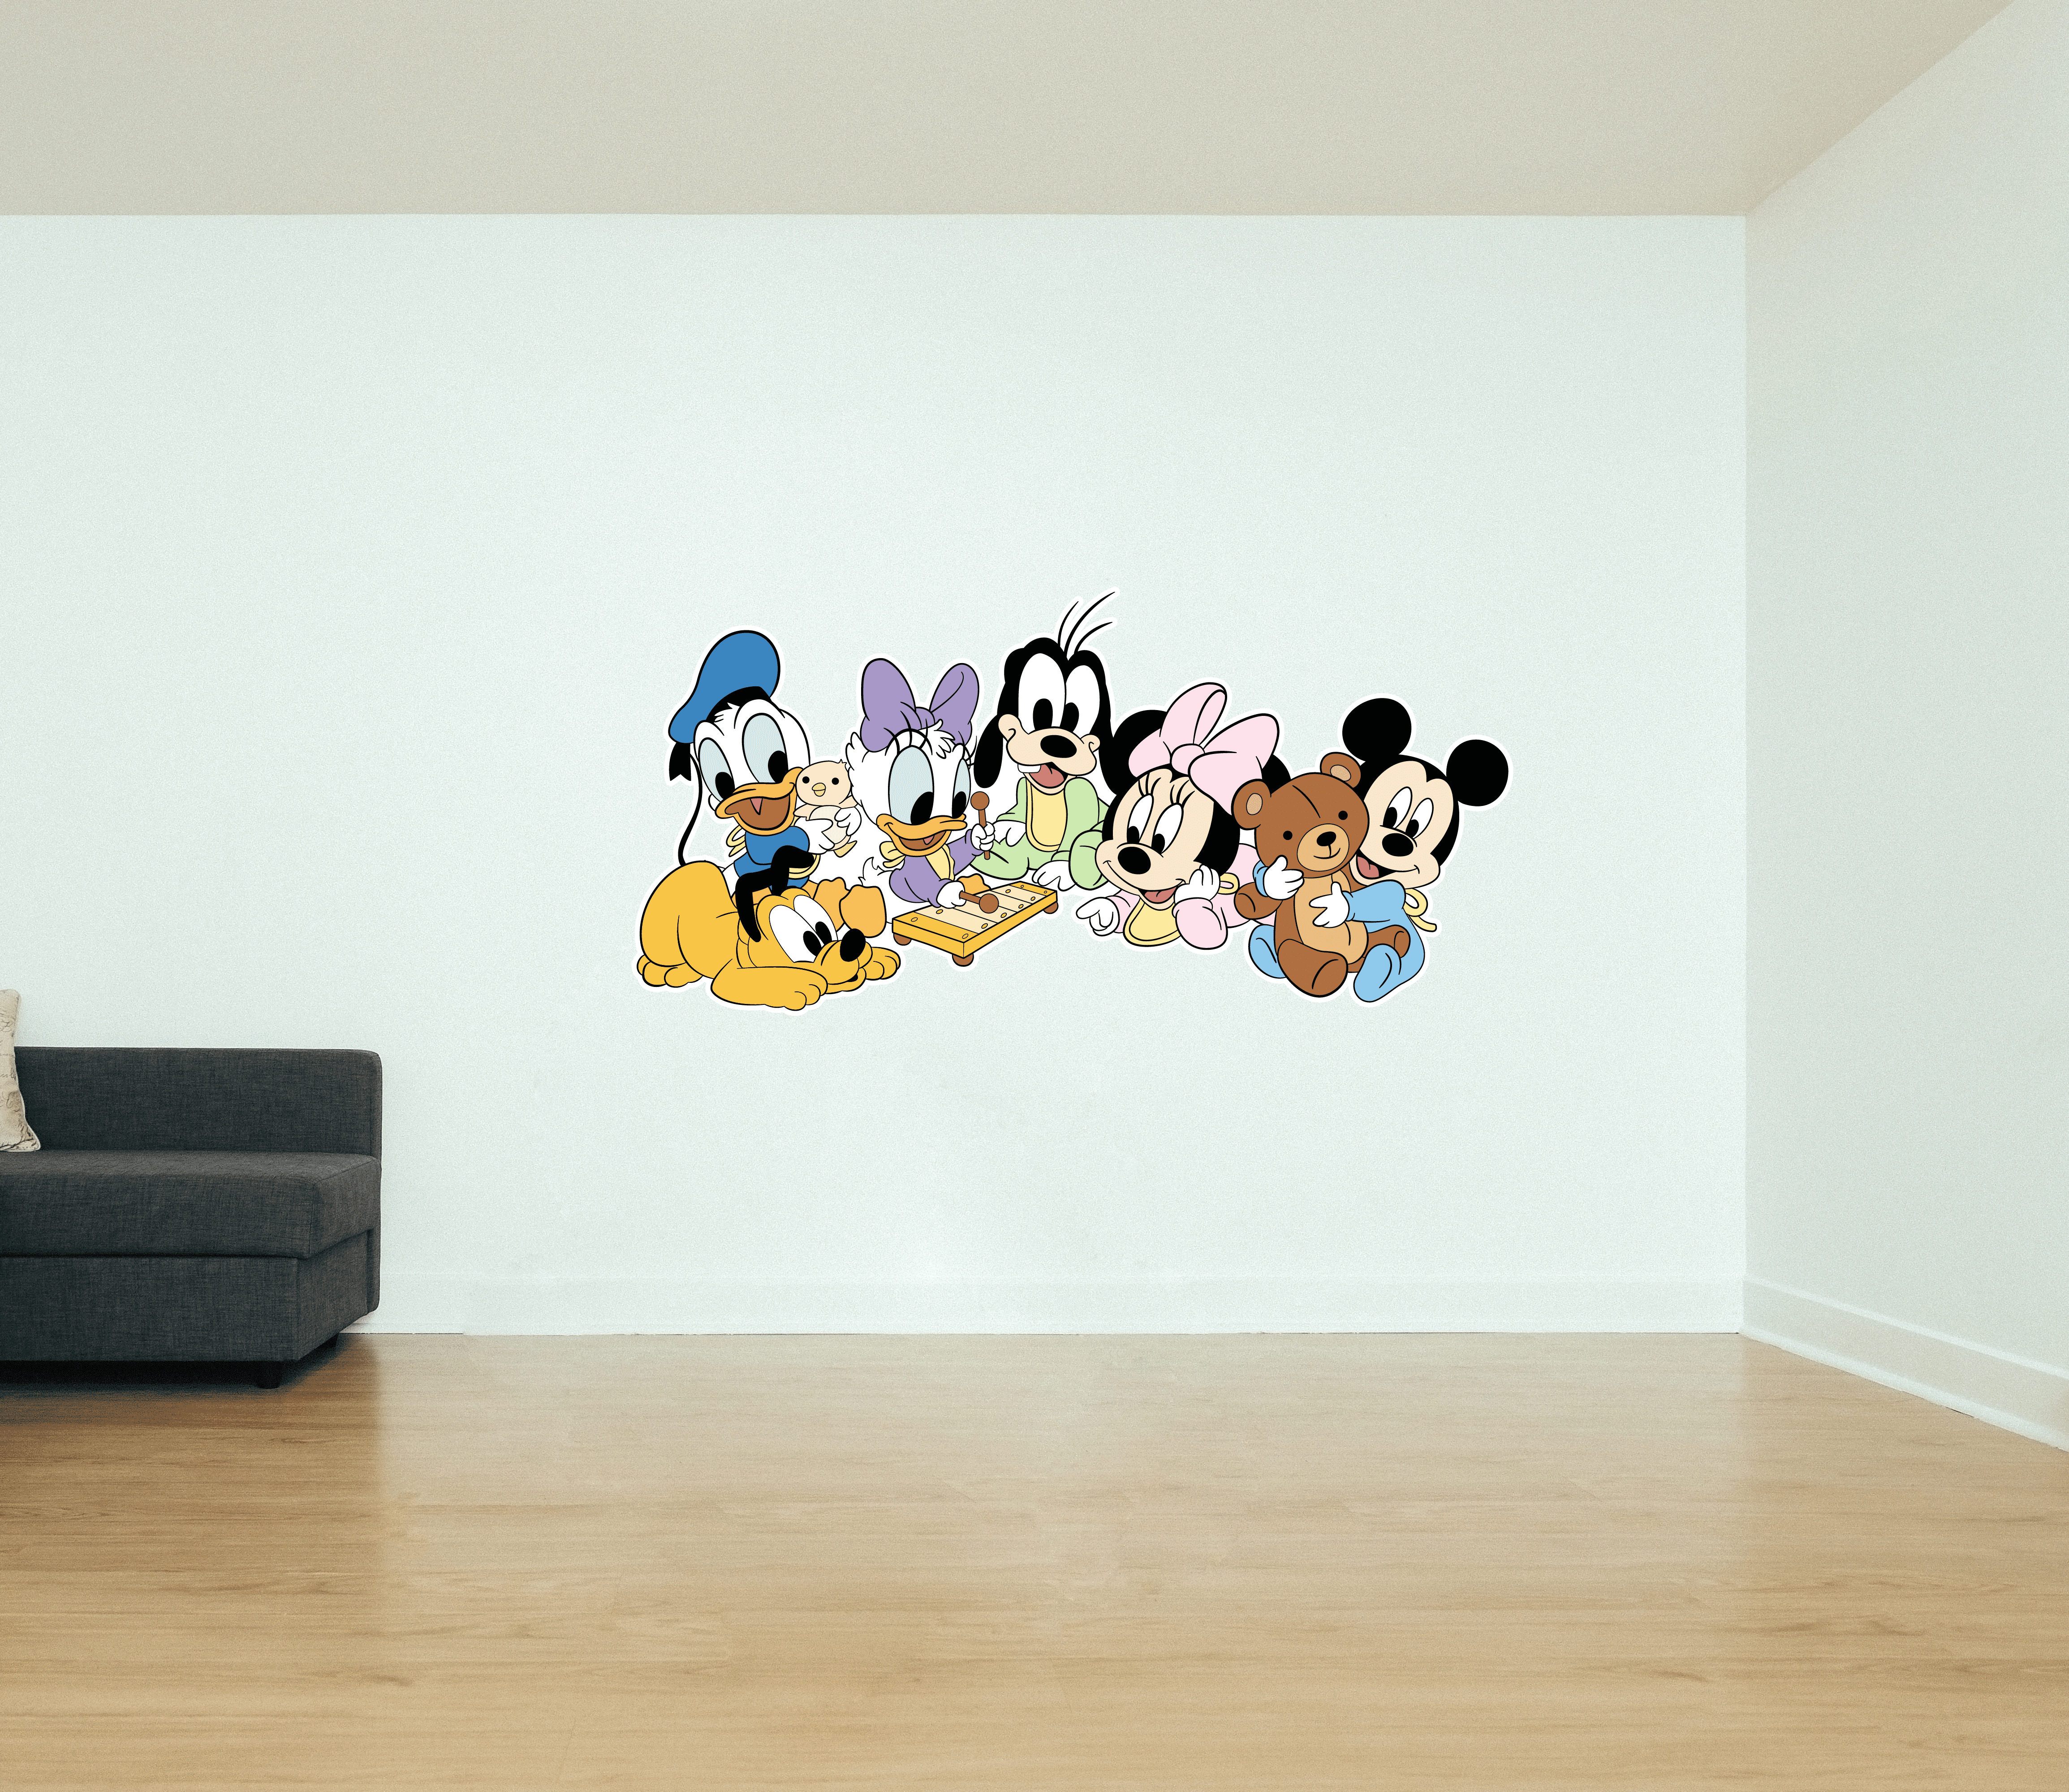 BABY MINNIE MICKEY MOUSE PLUTO DONALD DAISY BABIES  STICKER WALL DECAL  LOT MB 